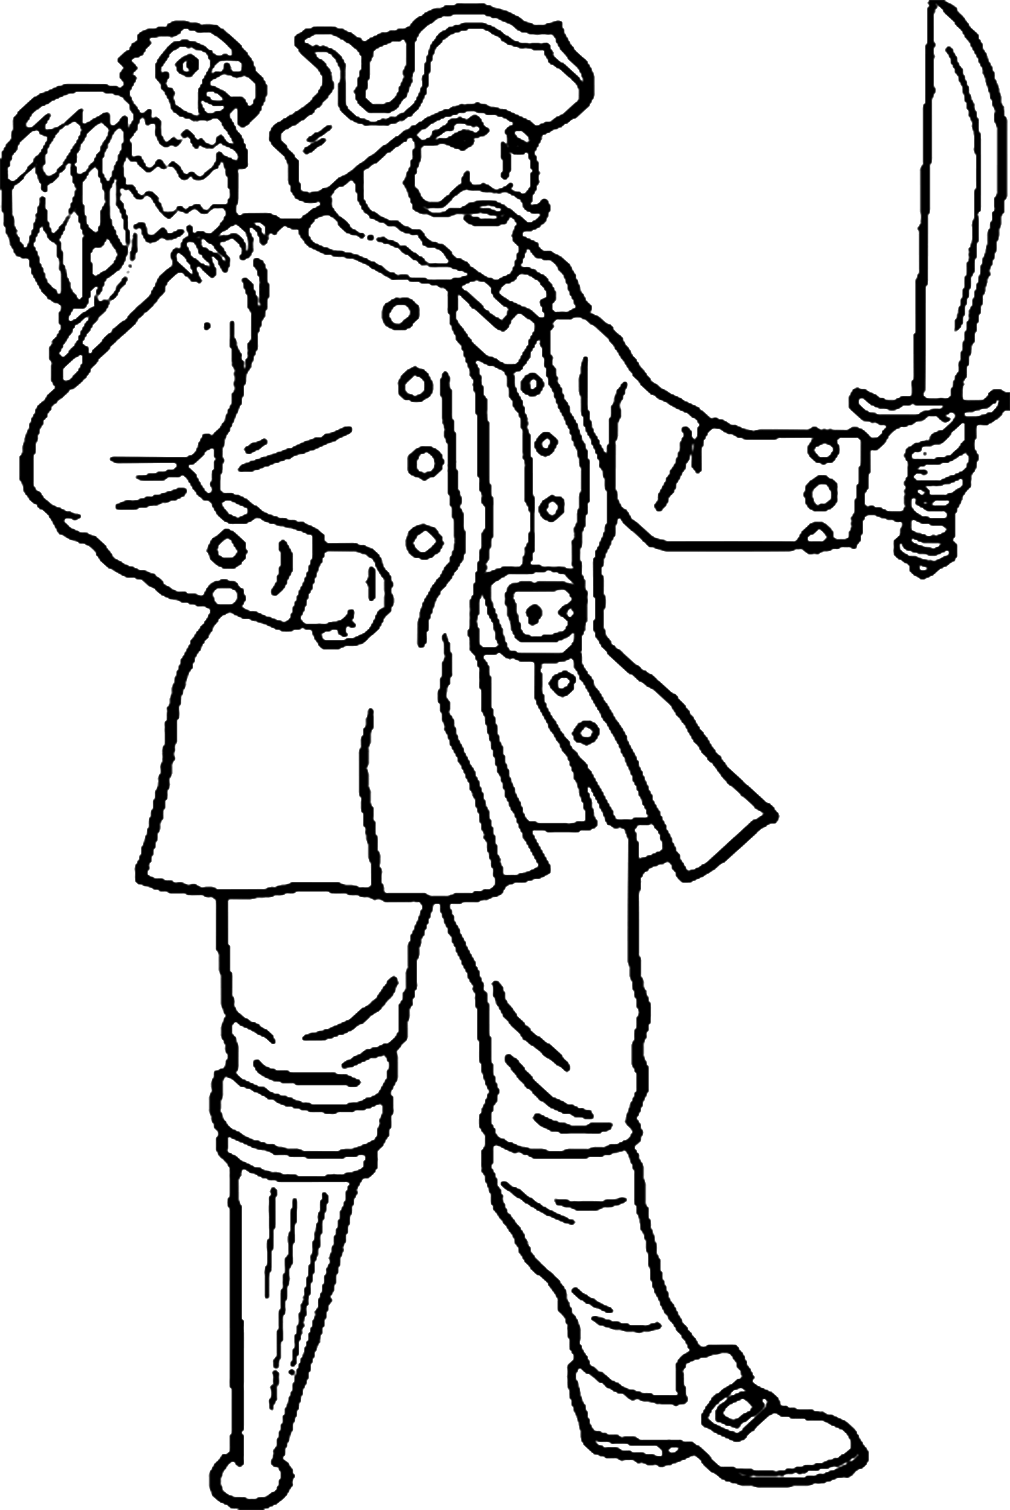 Pirate Free Coloring Pages